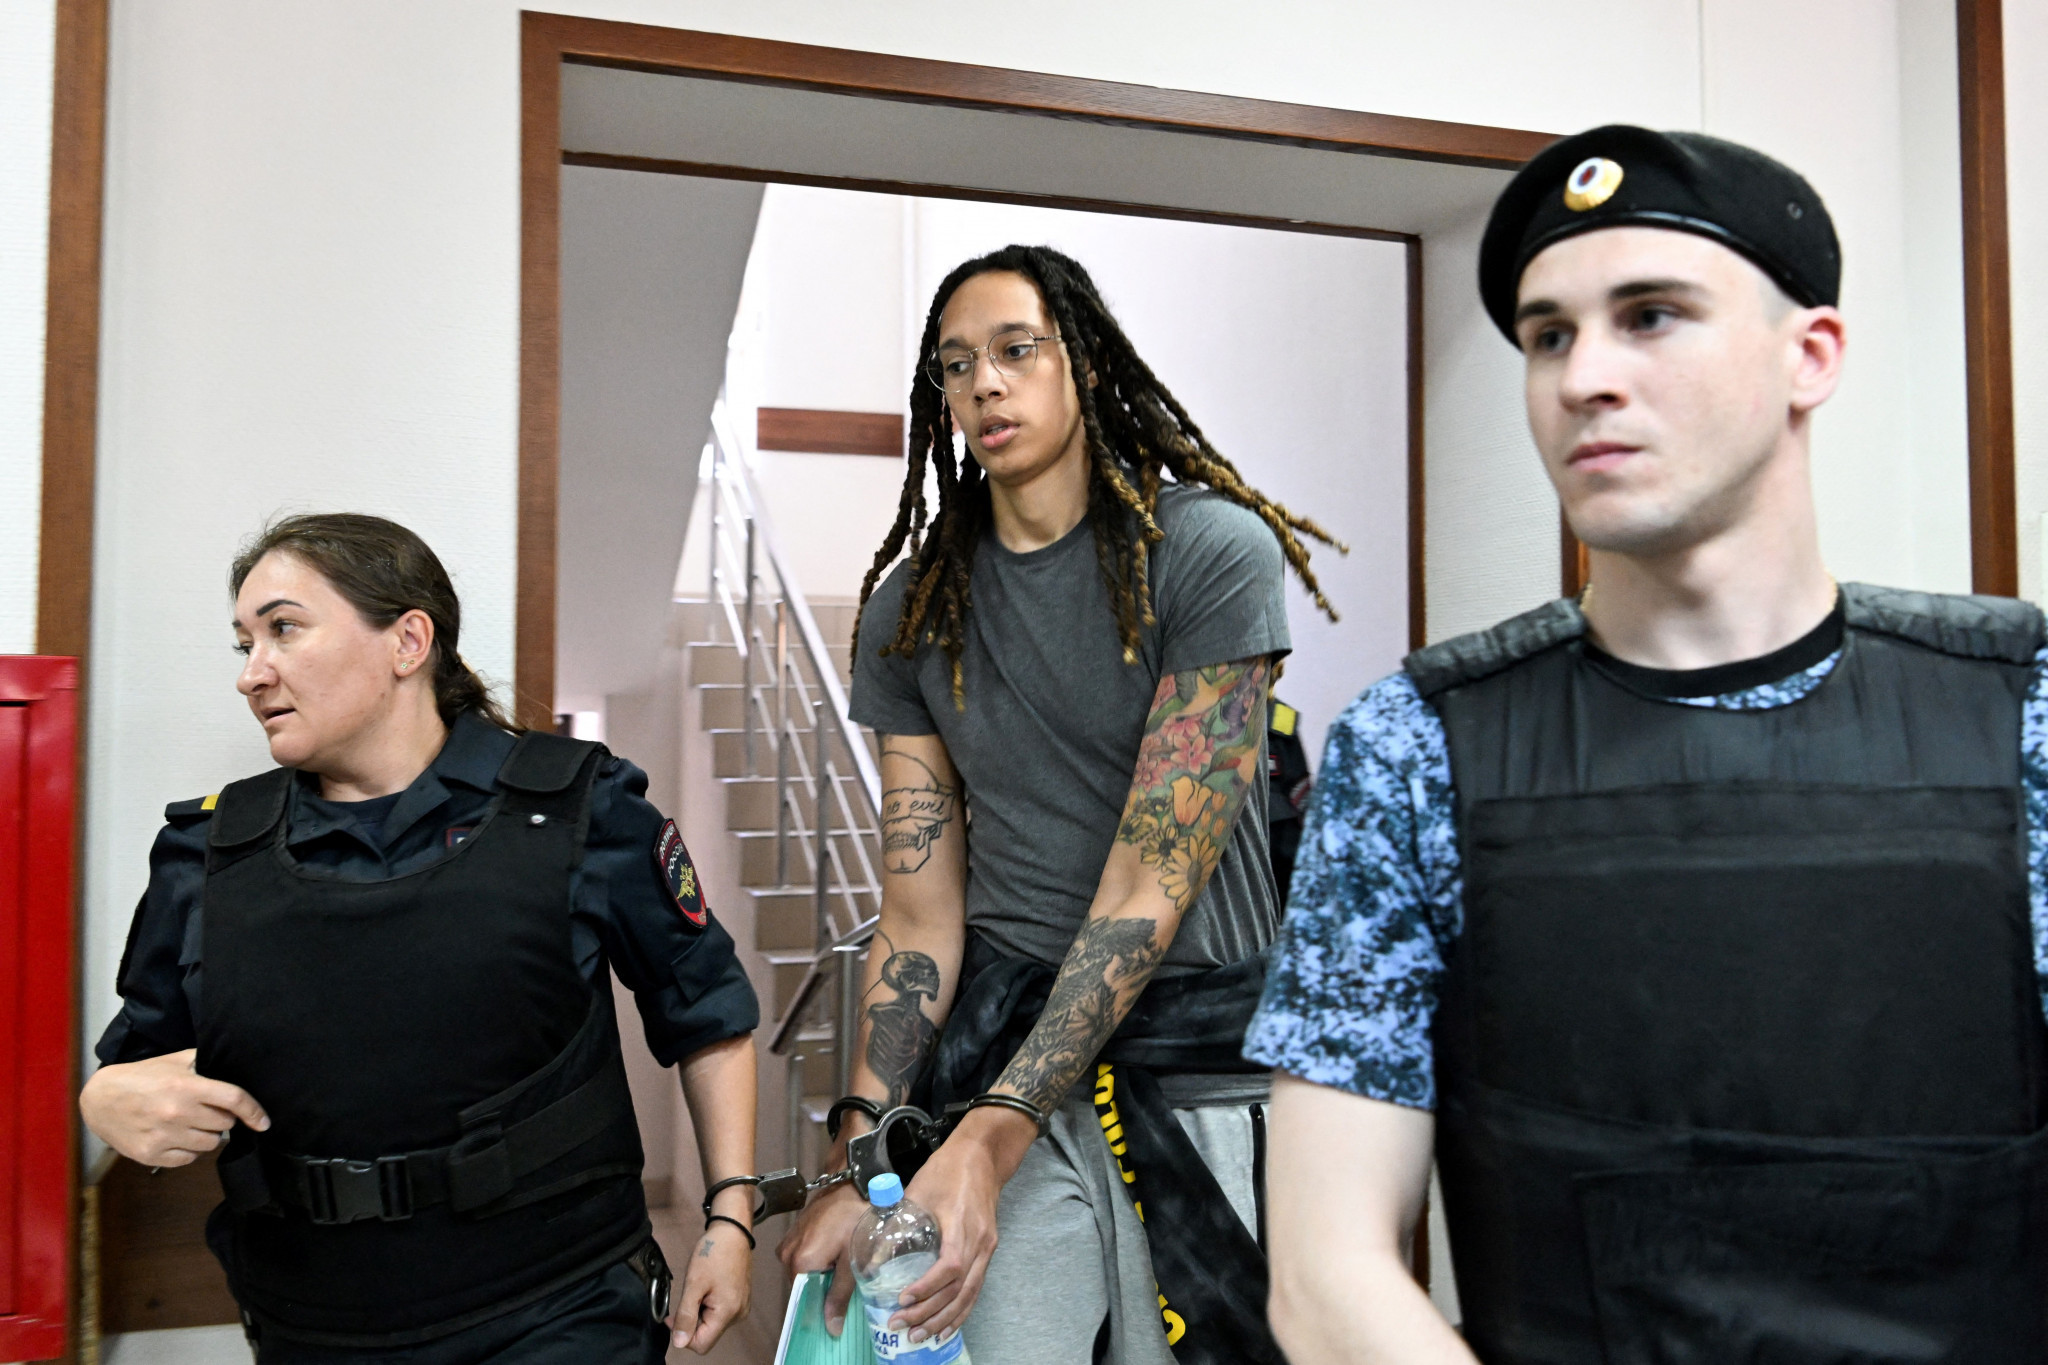 Brittney Griner had her detention extended by six months on Monday in a separate visit to the court in Khimki ©Getty Images